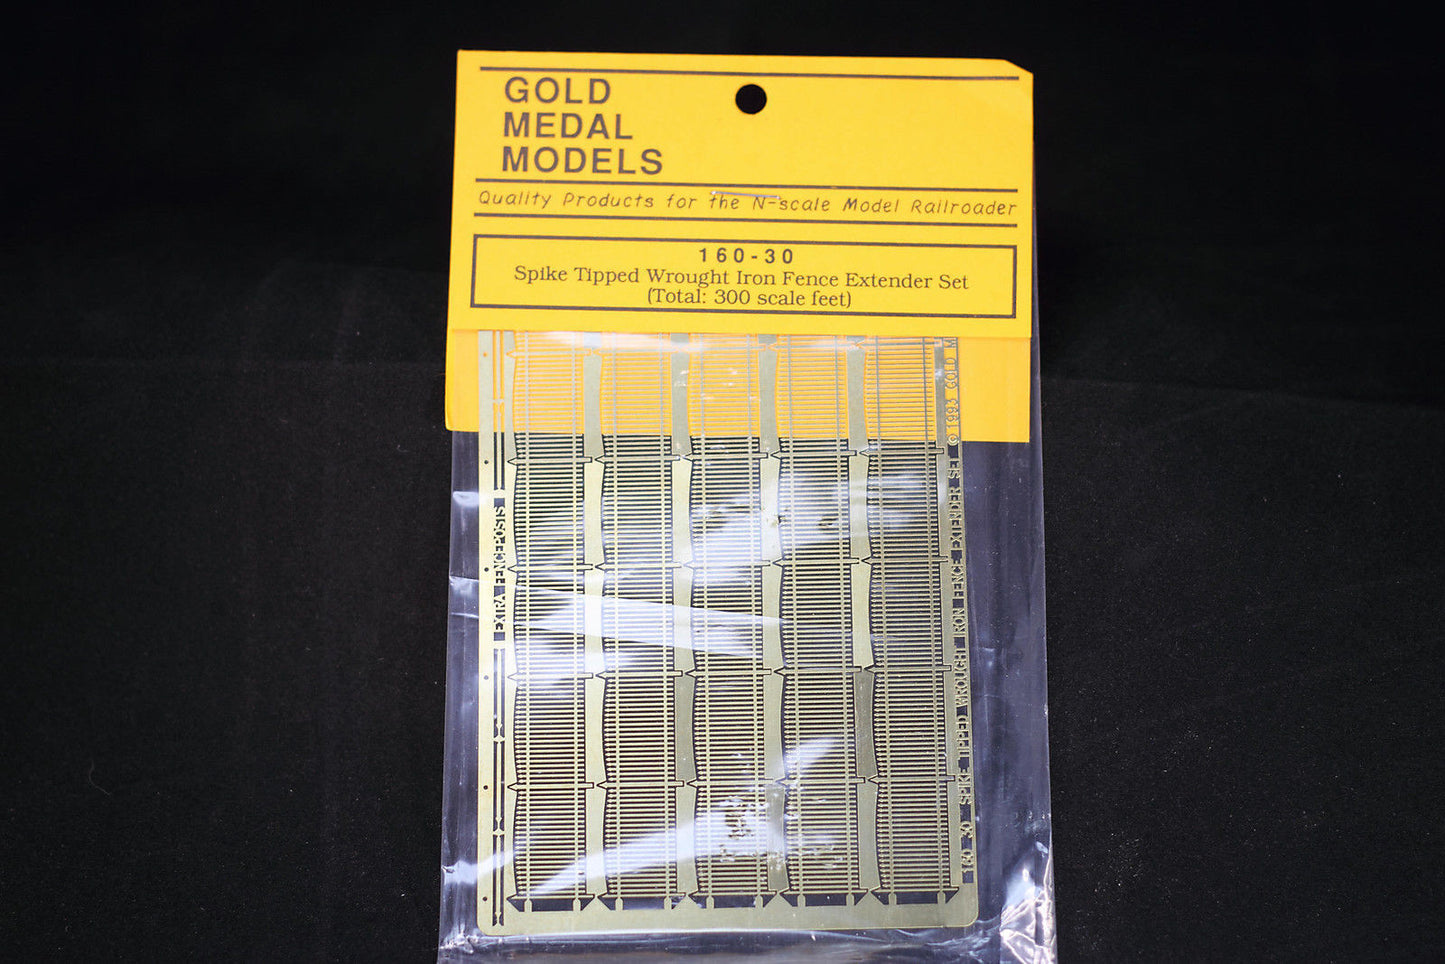 Gold Medal Models 160-30 N Spike Tipped Wrought Iron Fence